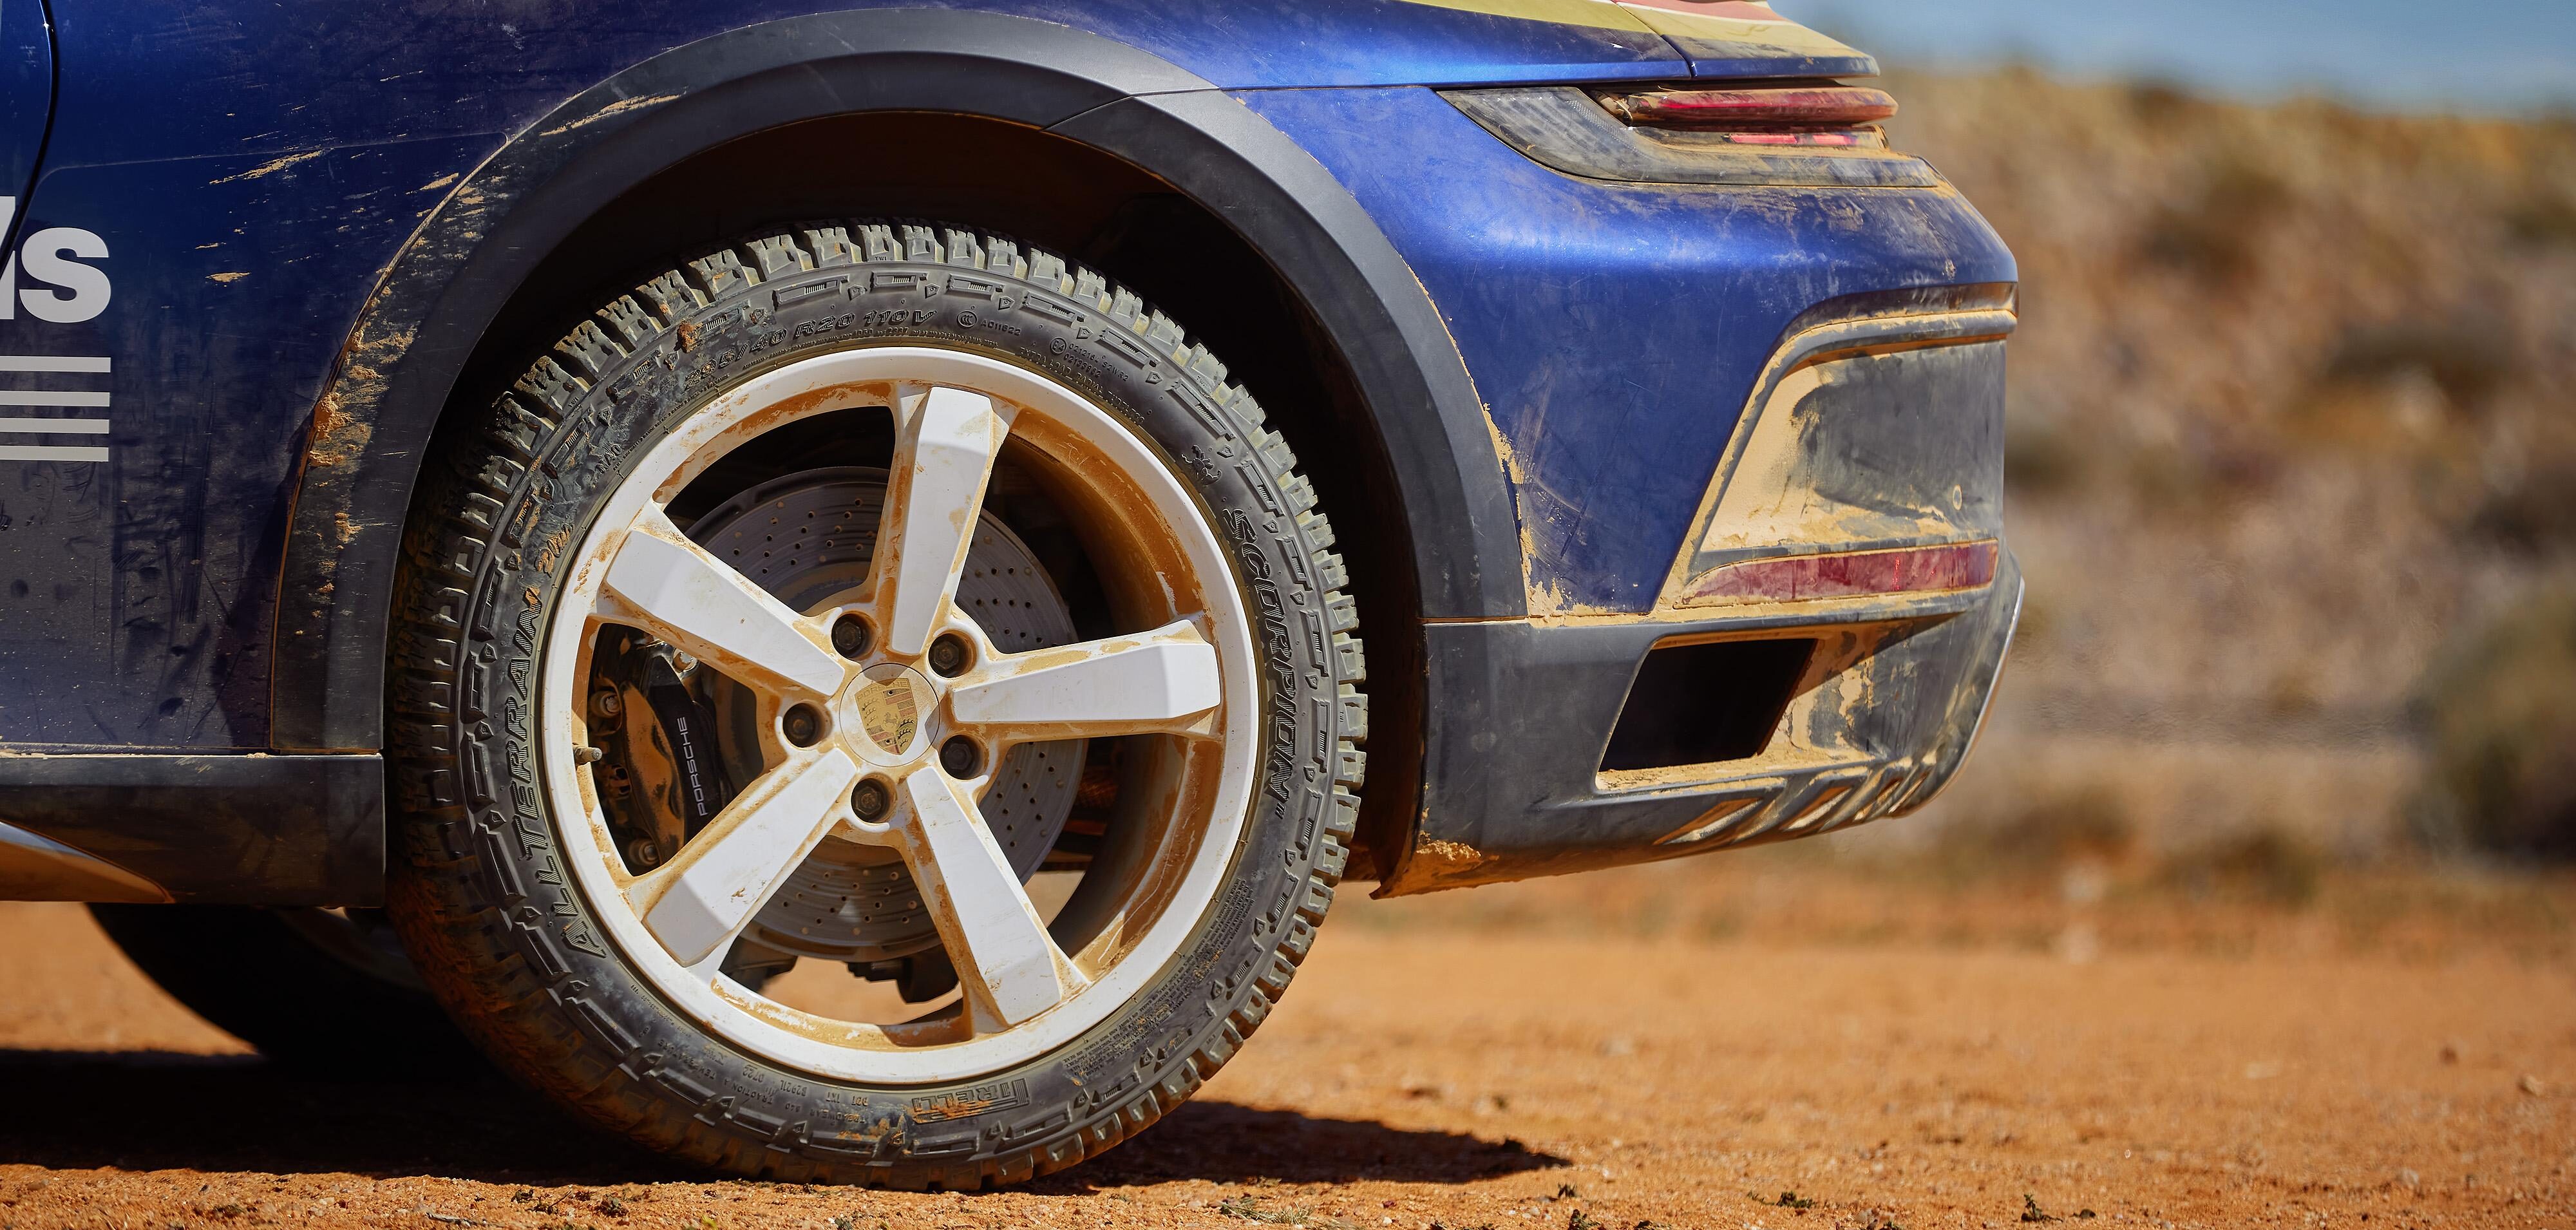 Tire the Technology specifies time | tire for International 911 off-road Porsche first model on